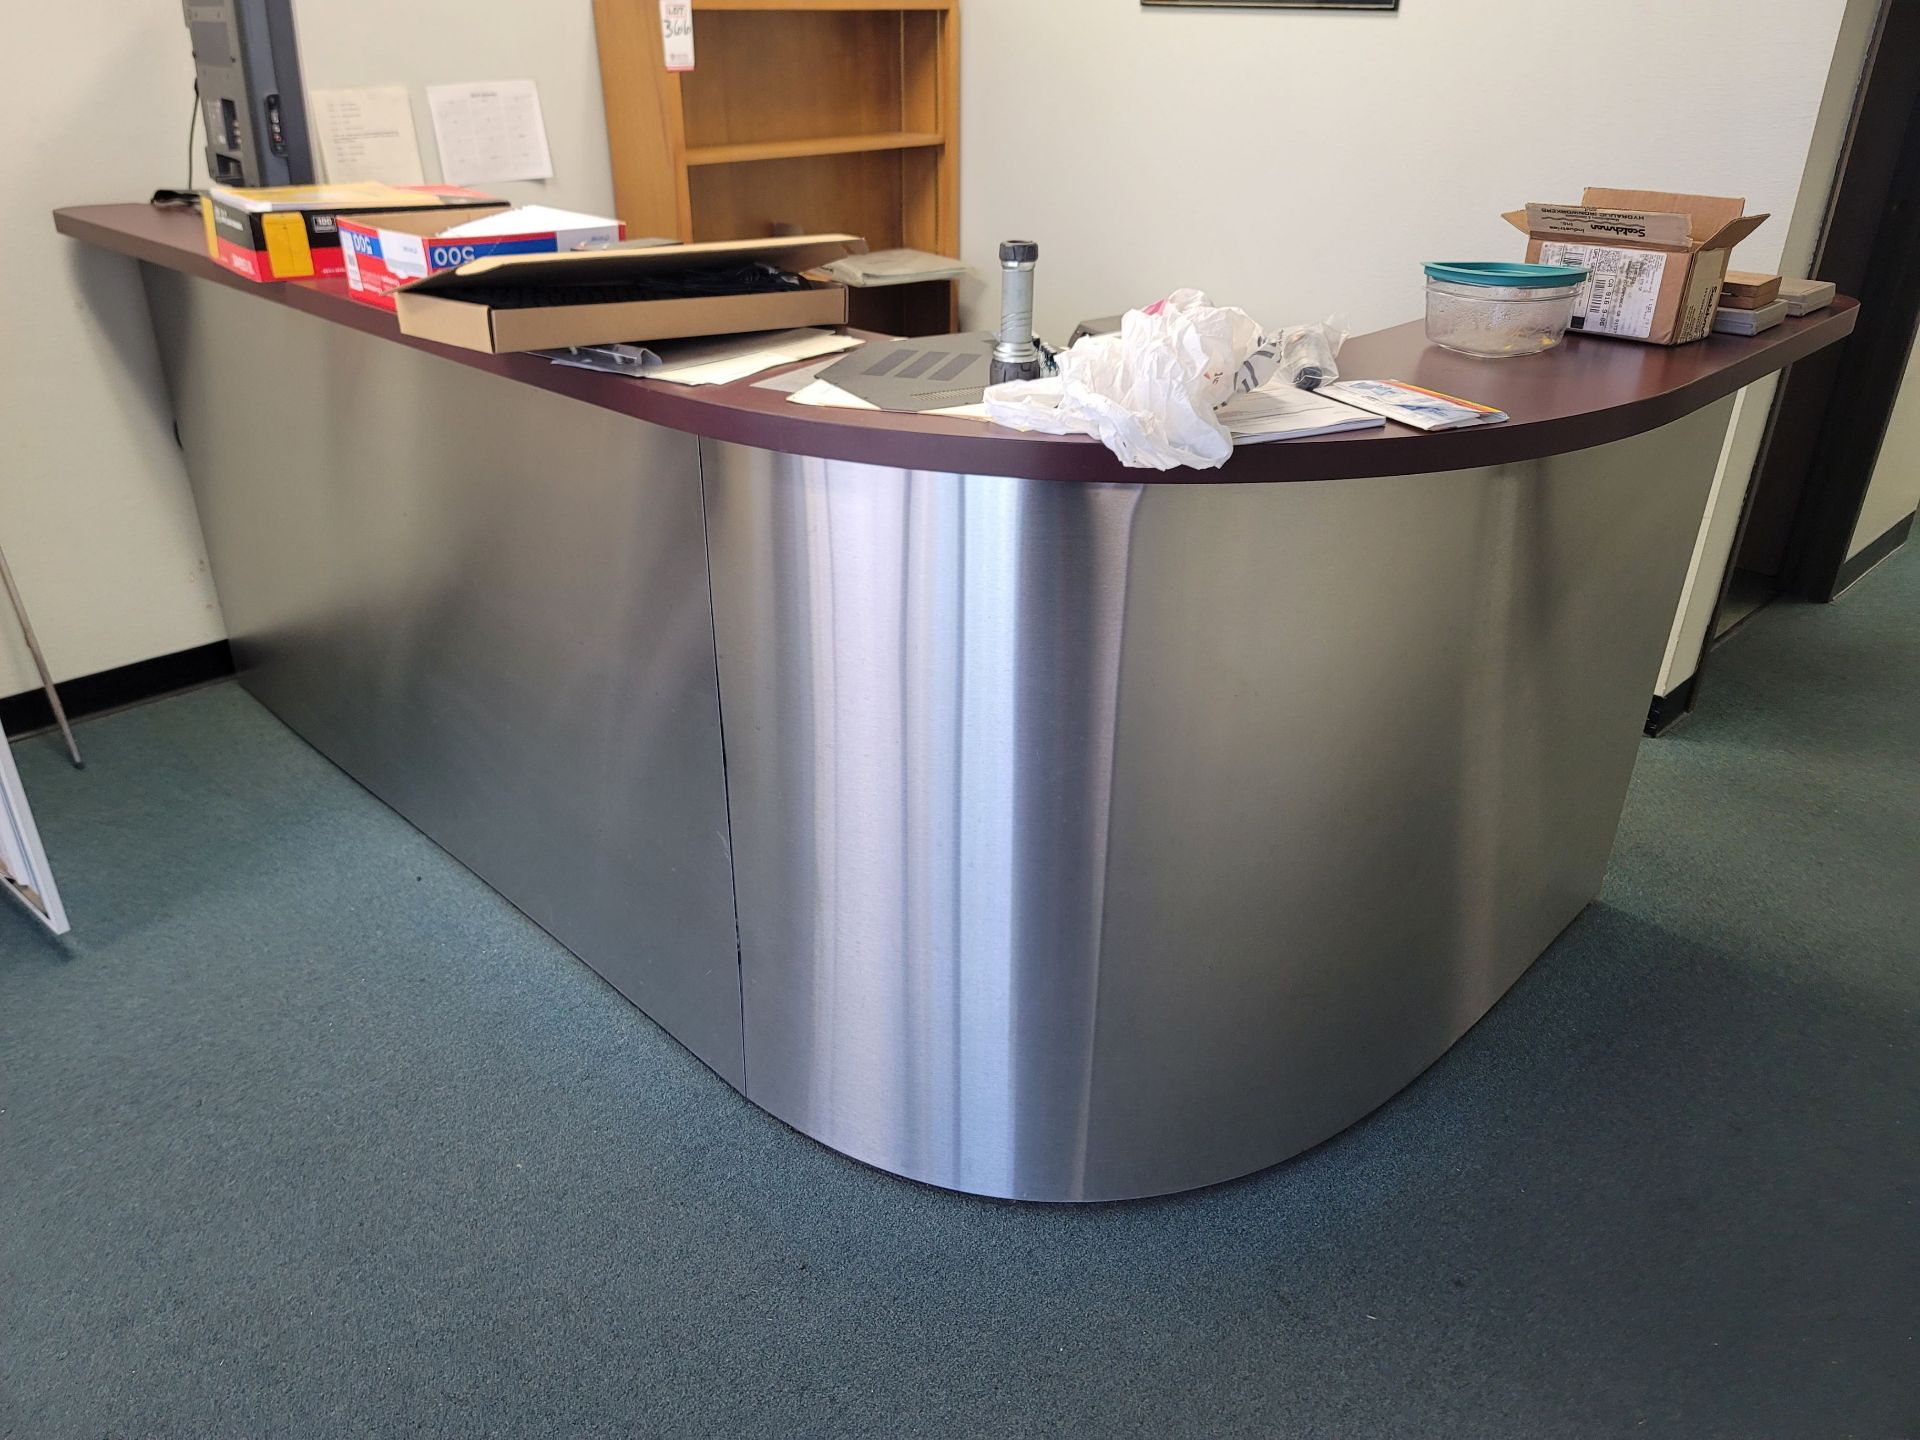 L-SHAPED RECEPTION DESK, 8-1/2' X 5', CONTENTS NOT INCLUDED - Image 2 of 2